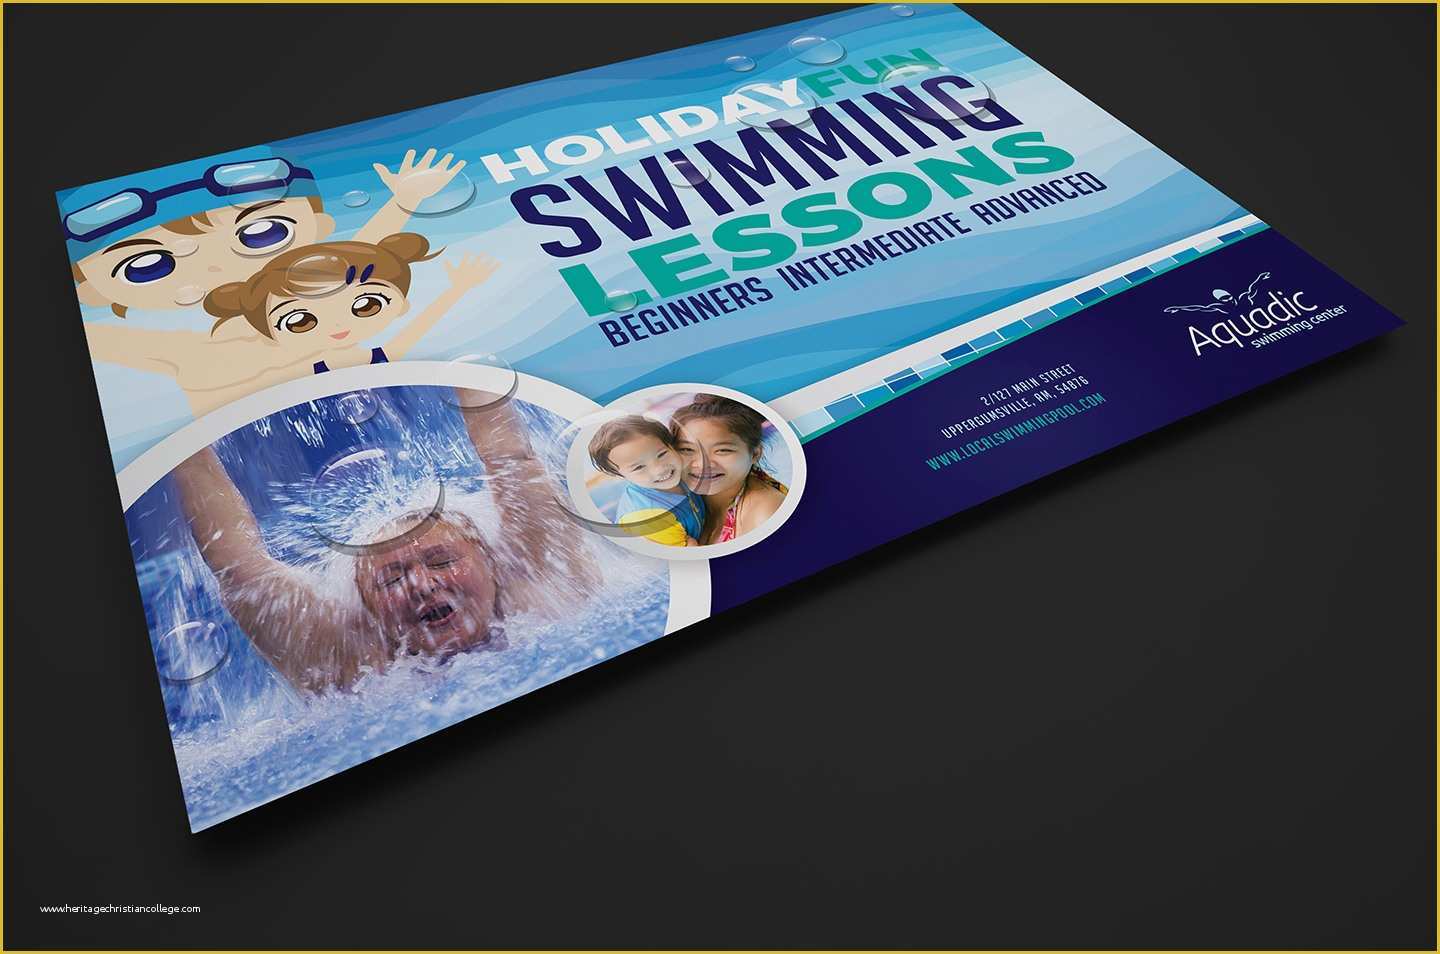 Swim Lesson Flyer Template Free Of Swimming Lessons Flyer Template for Shop & Illustrator